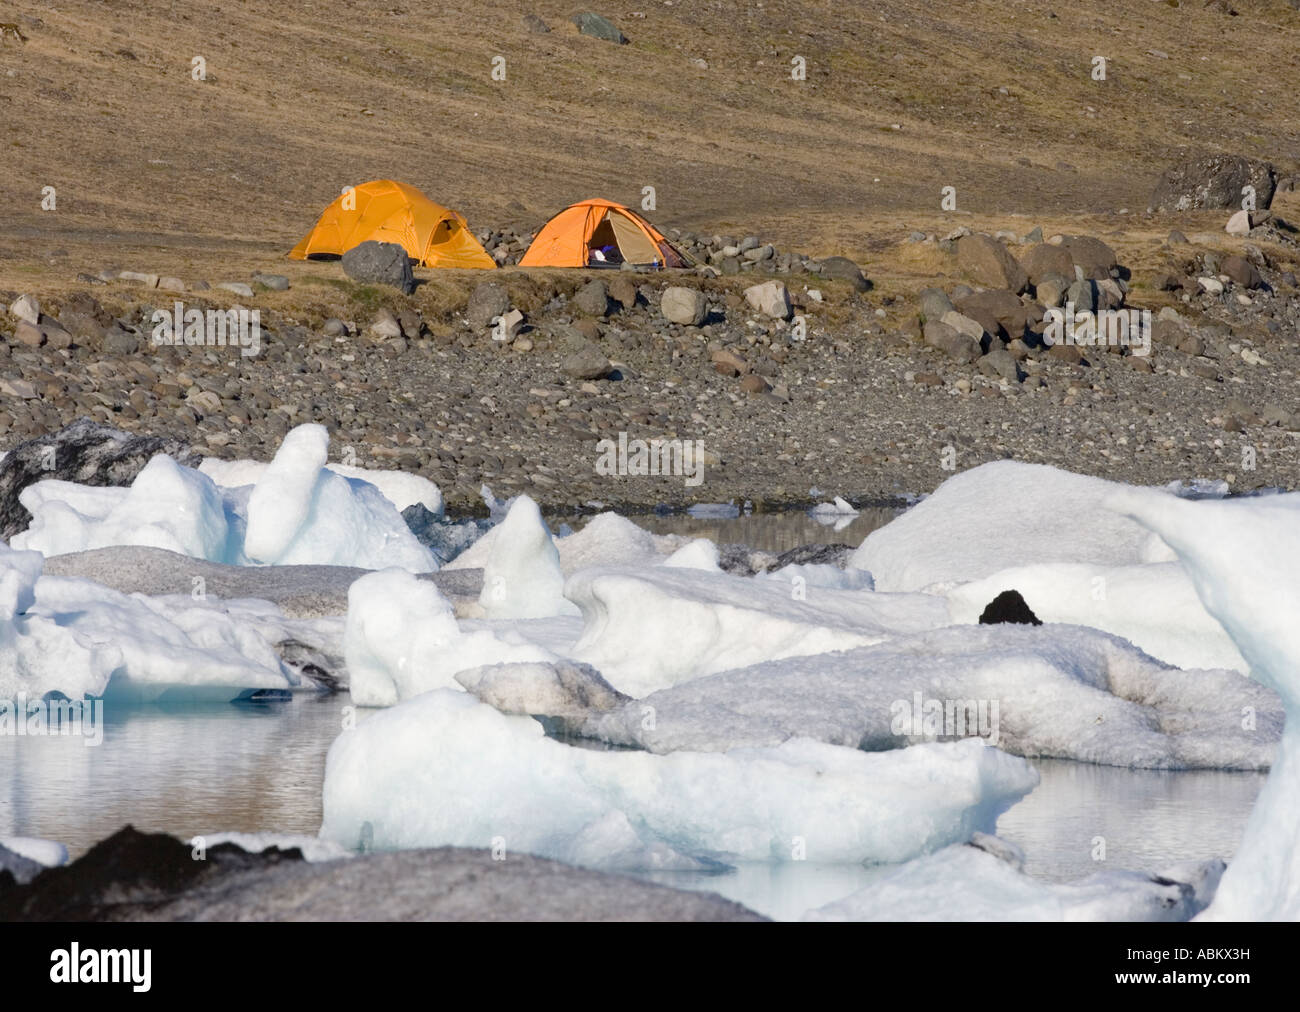 Campers in Orange Tents Stock Photo